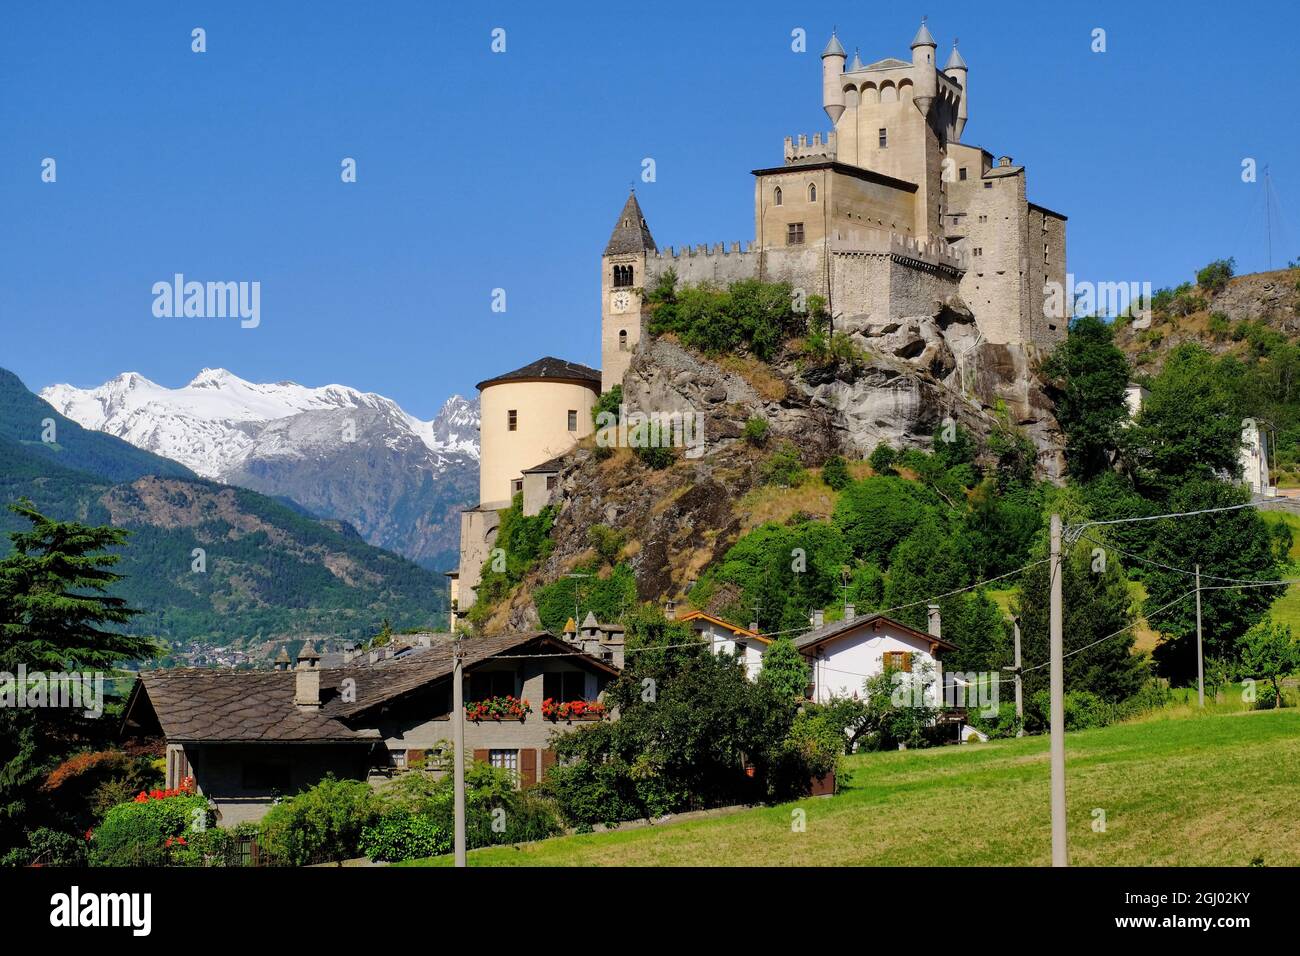 Snow covered mountains, Saint Pierre Castle, church and houses in Saint Pierre, Aosta Valley, Italy Stock Photo